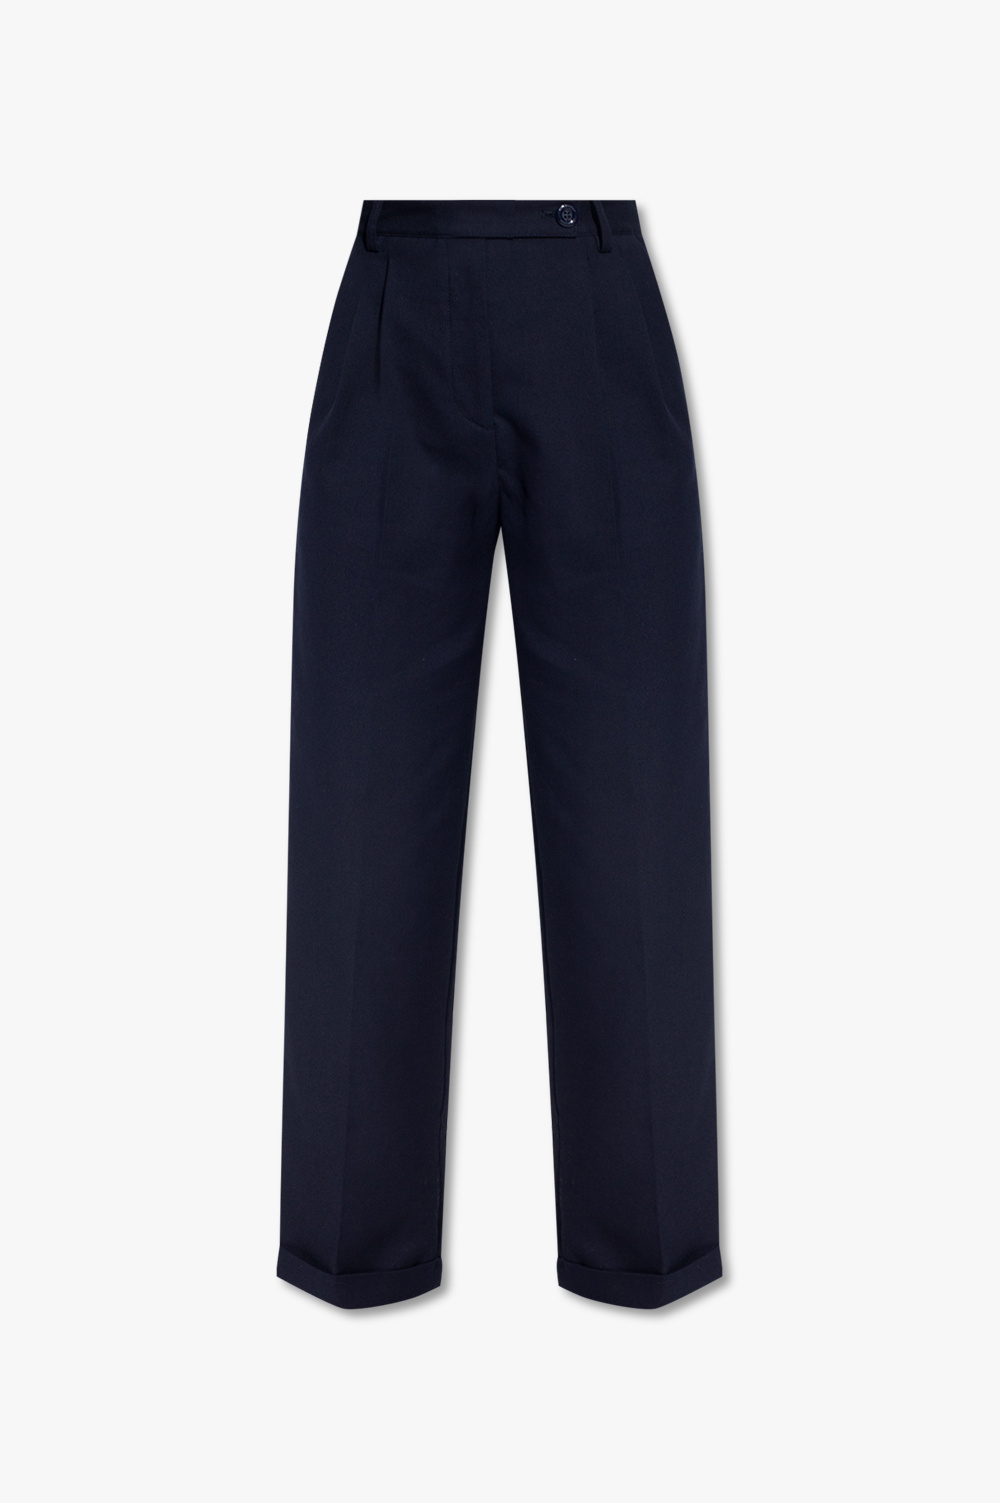 See By Chloé Pleat-front trousers